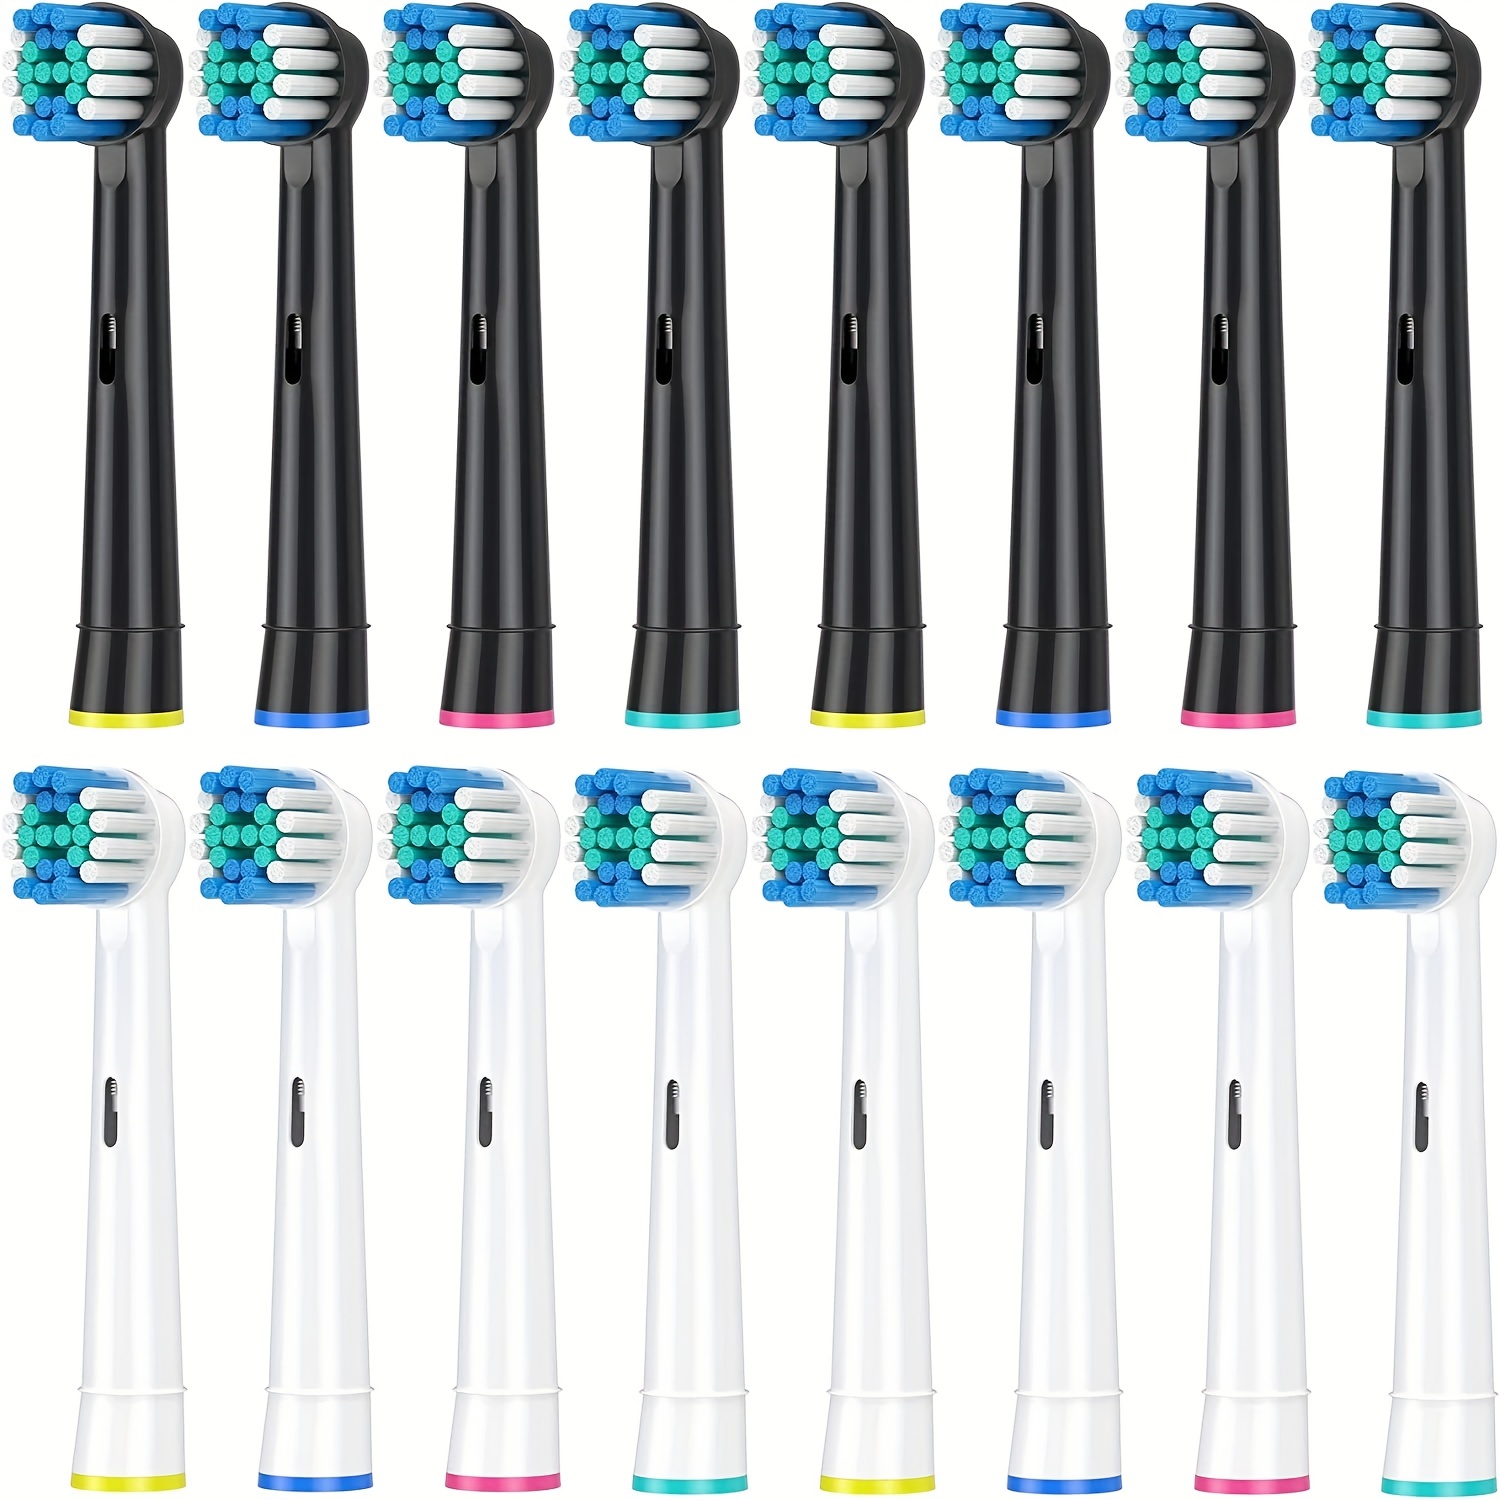 

16pcs Toothbrush Head Compatible For Braun For Oral B Electric Toothbrush, Replacement Brush Heads For Oral-b Pro Smart Vitality Genius